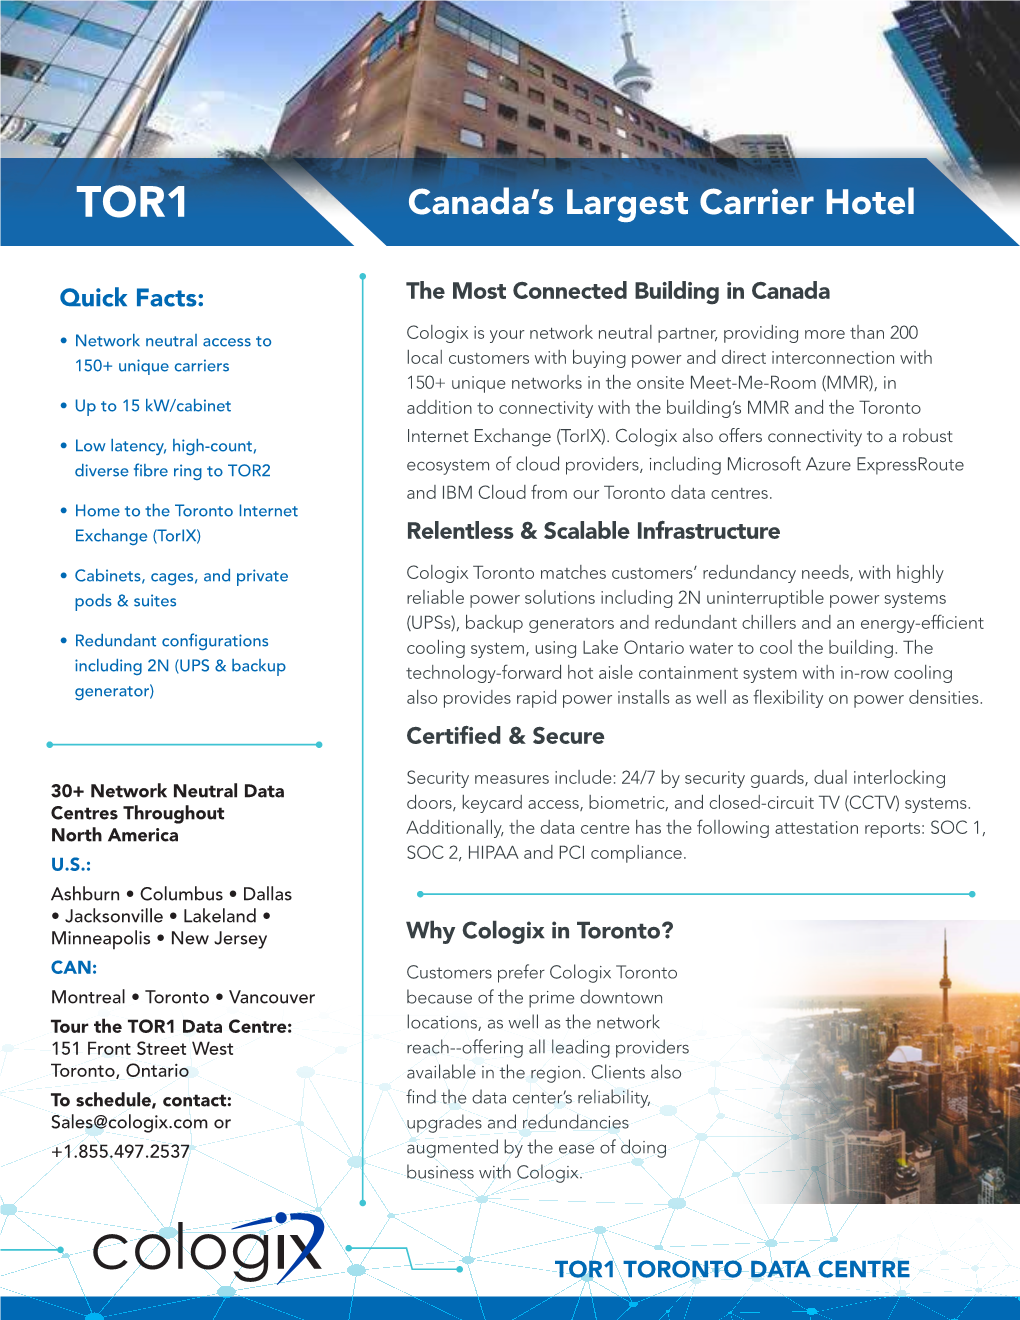 Canada's Largest Carrier Hotel